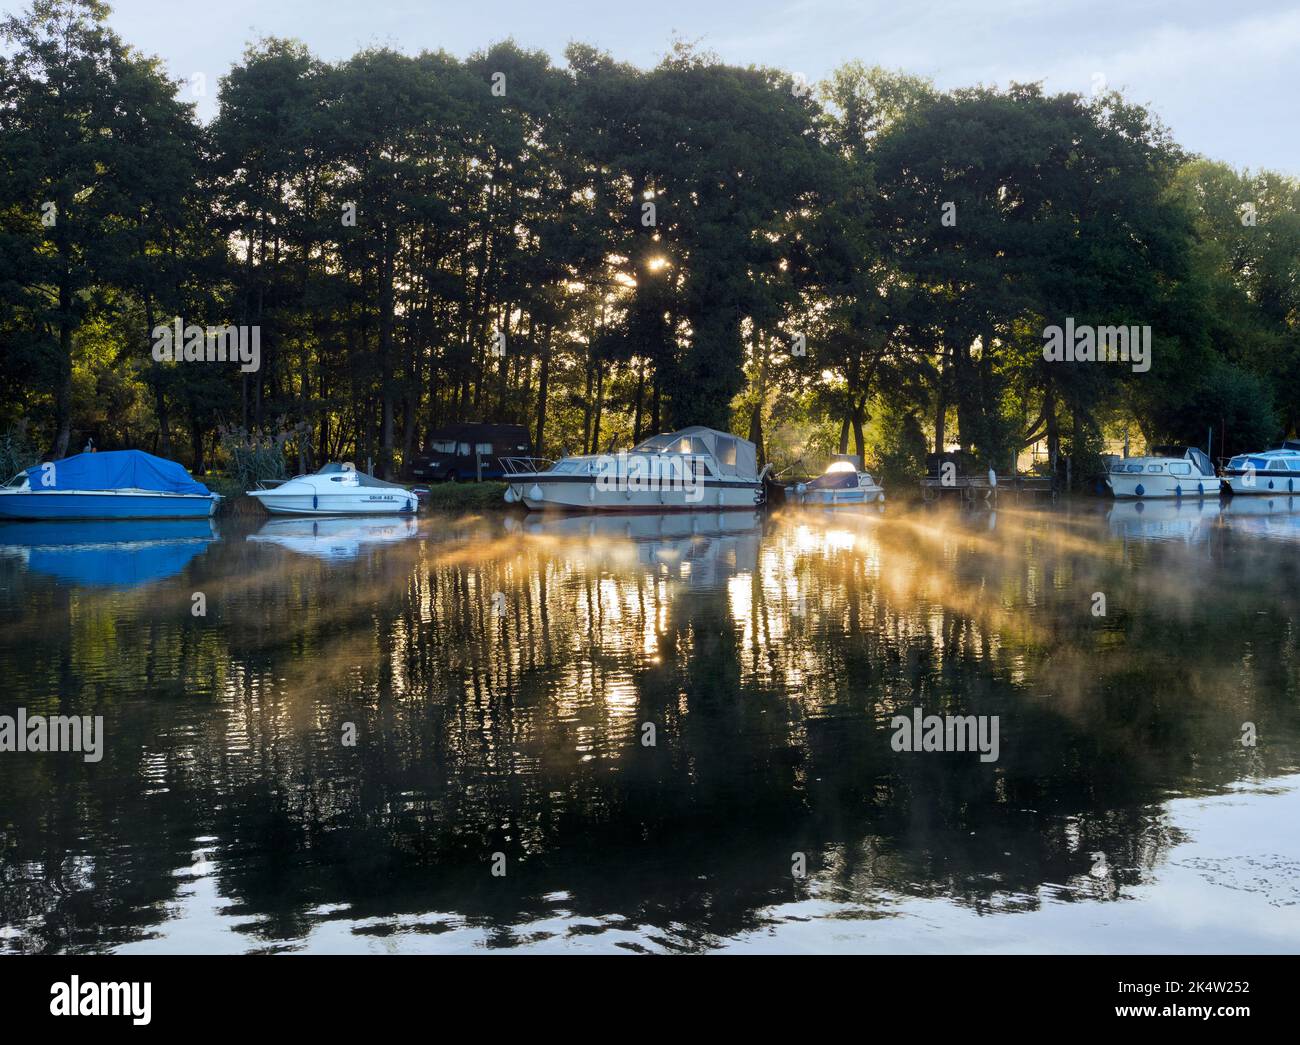 Here we see a line of pleasure boats moored by the Thames by Kennington, just outside Oxford. It's a misty Autumn sunrise. Seen from Thames Path - a w Stock Photo